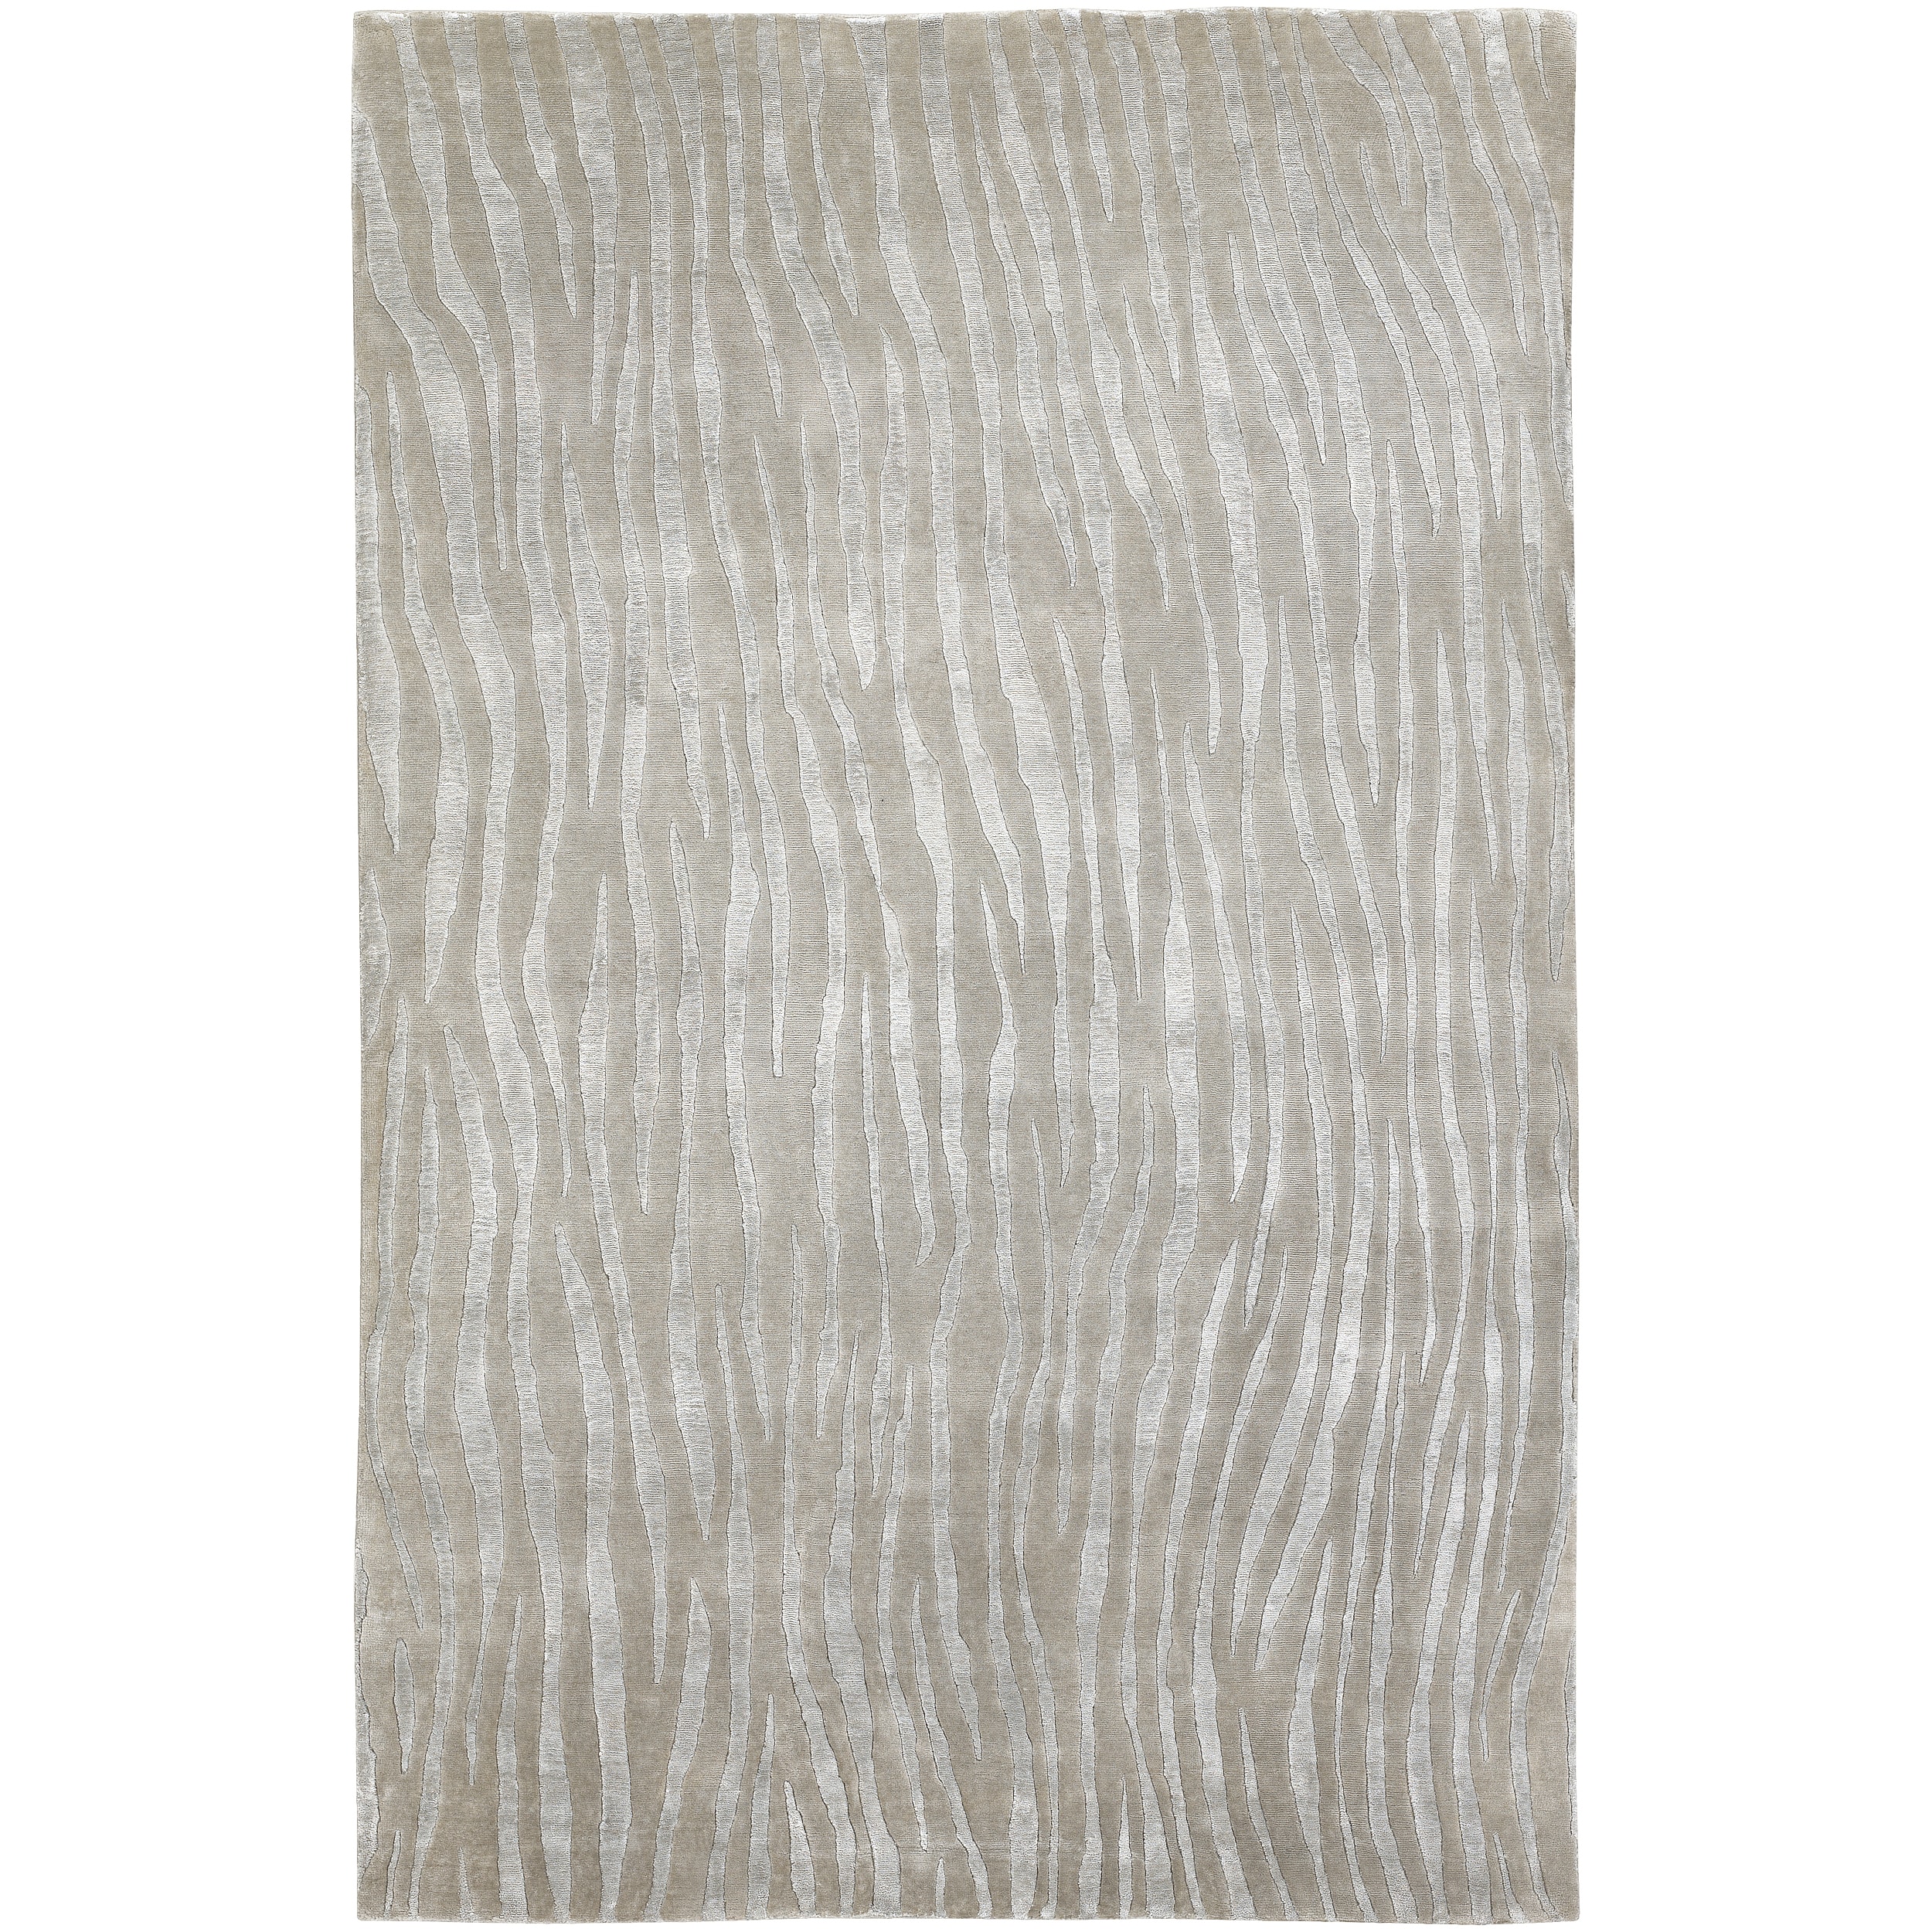 Candice Olson Hand Knotted Grey Abstract Plush Wool Cortina Rug (2 X 3)